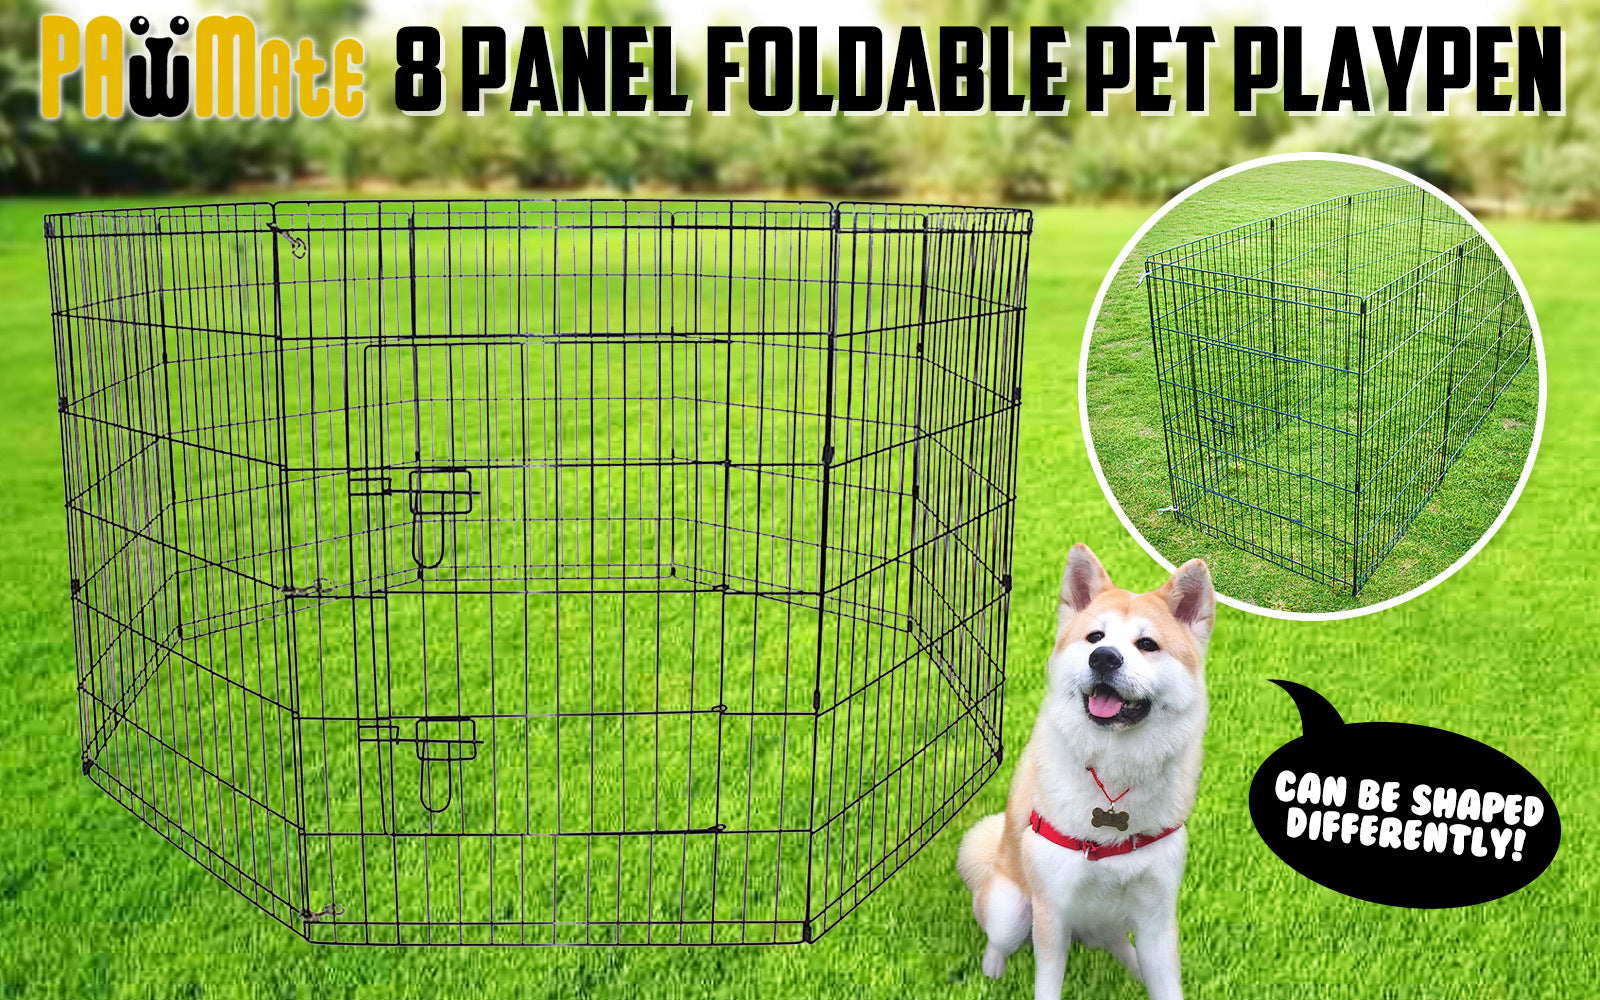 Pet Playpen 8 Panel 24in Foldable Dog Cage + Cover - image2